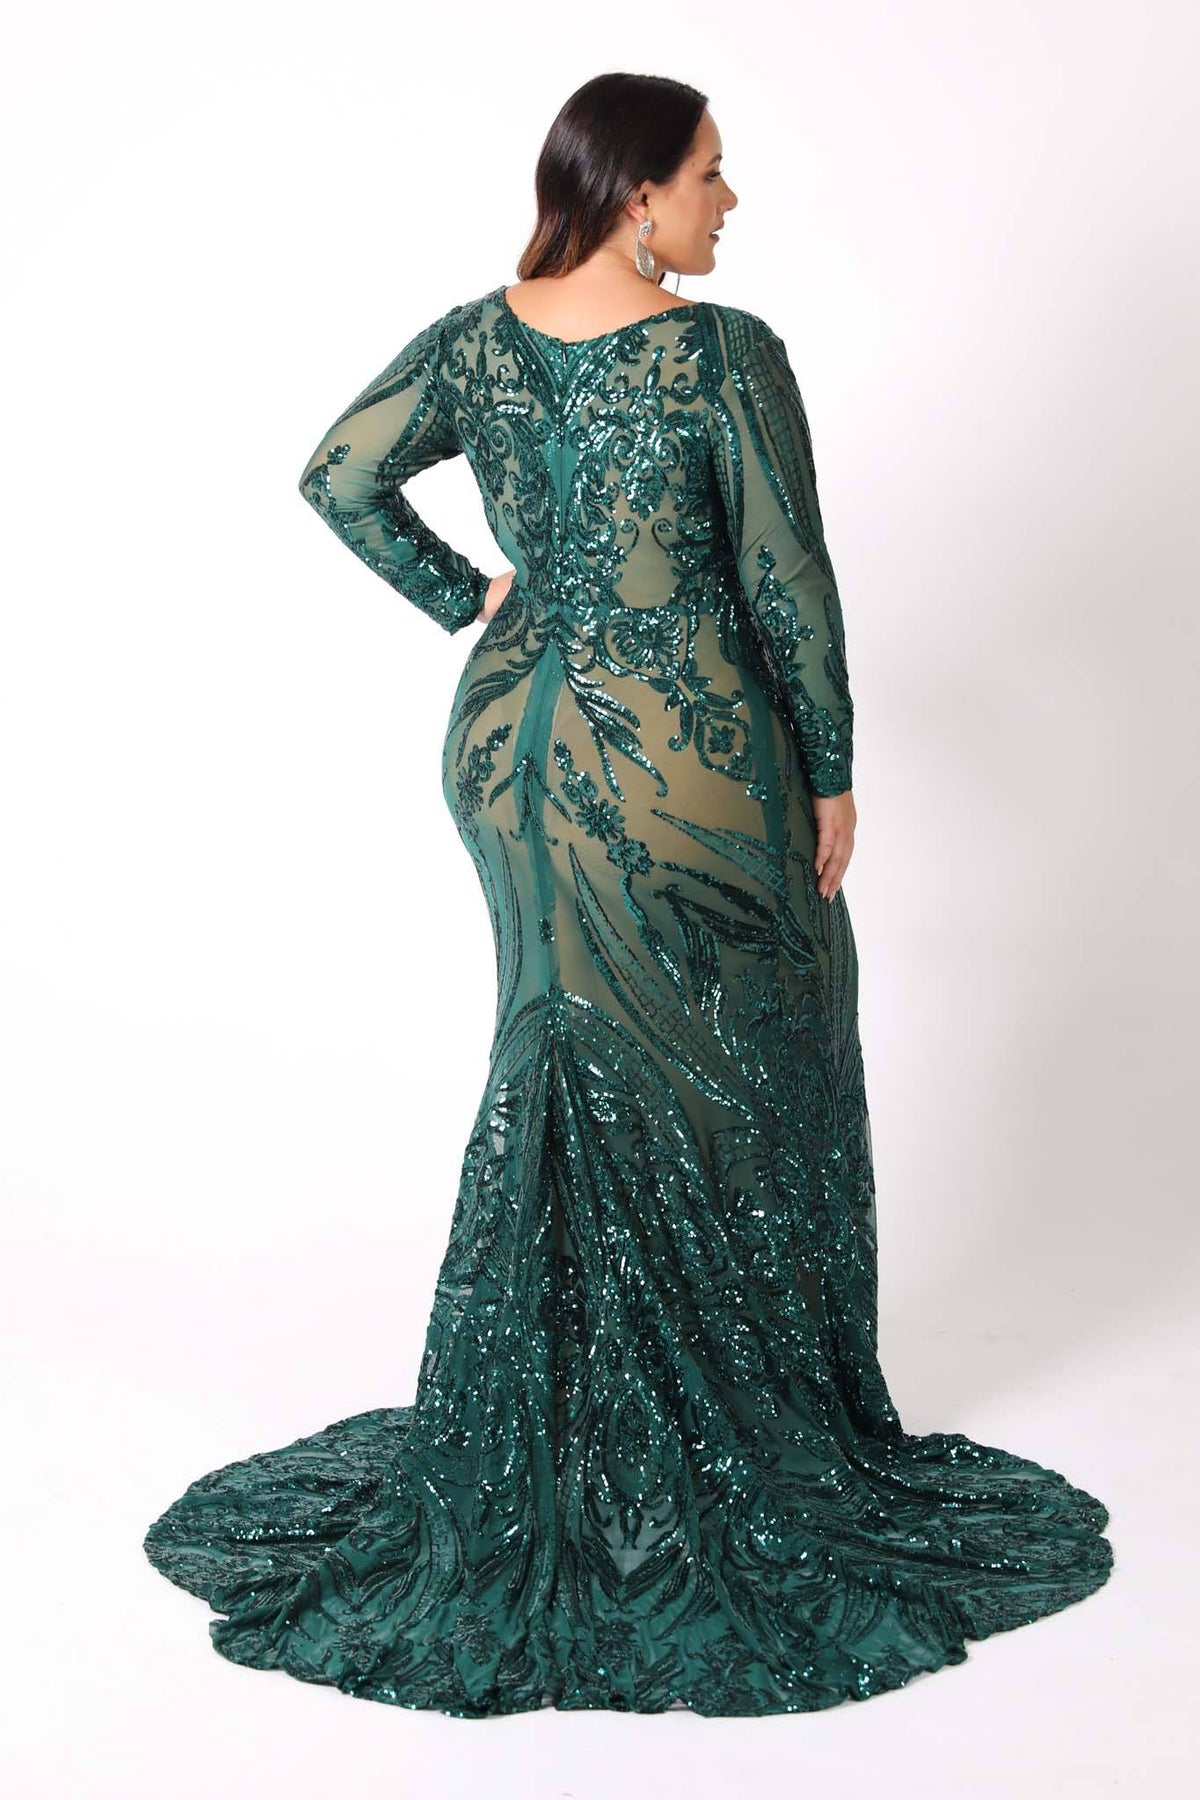 Elena Long-Sleeve Pattern Sequin Gown - Emerald/Nude